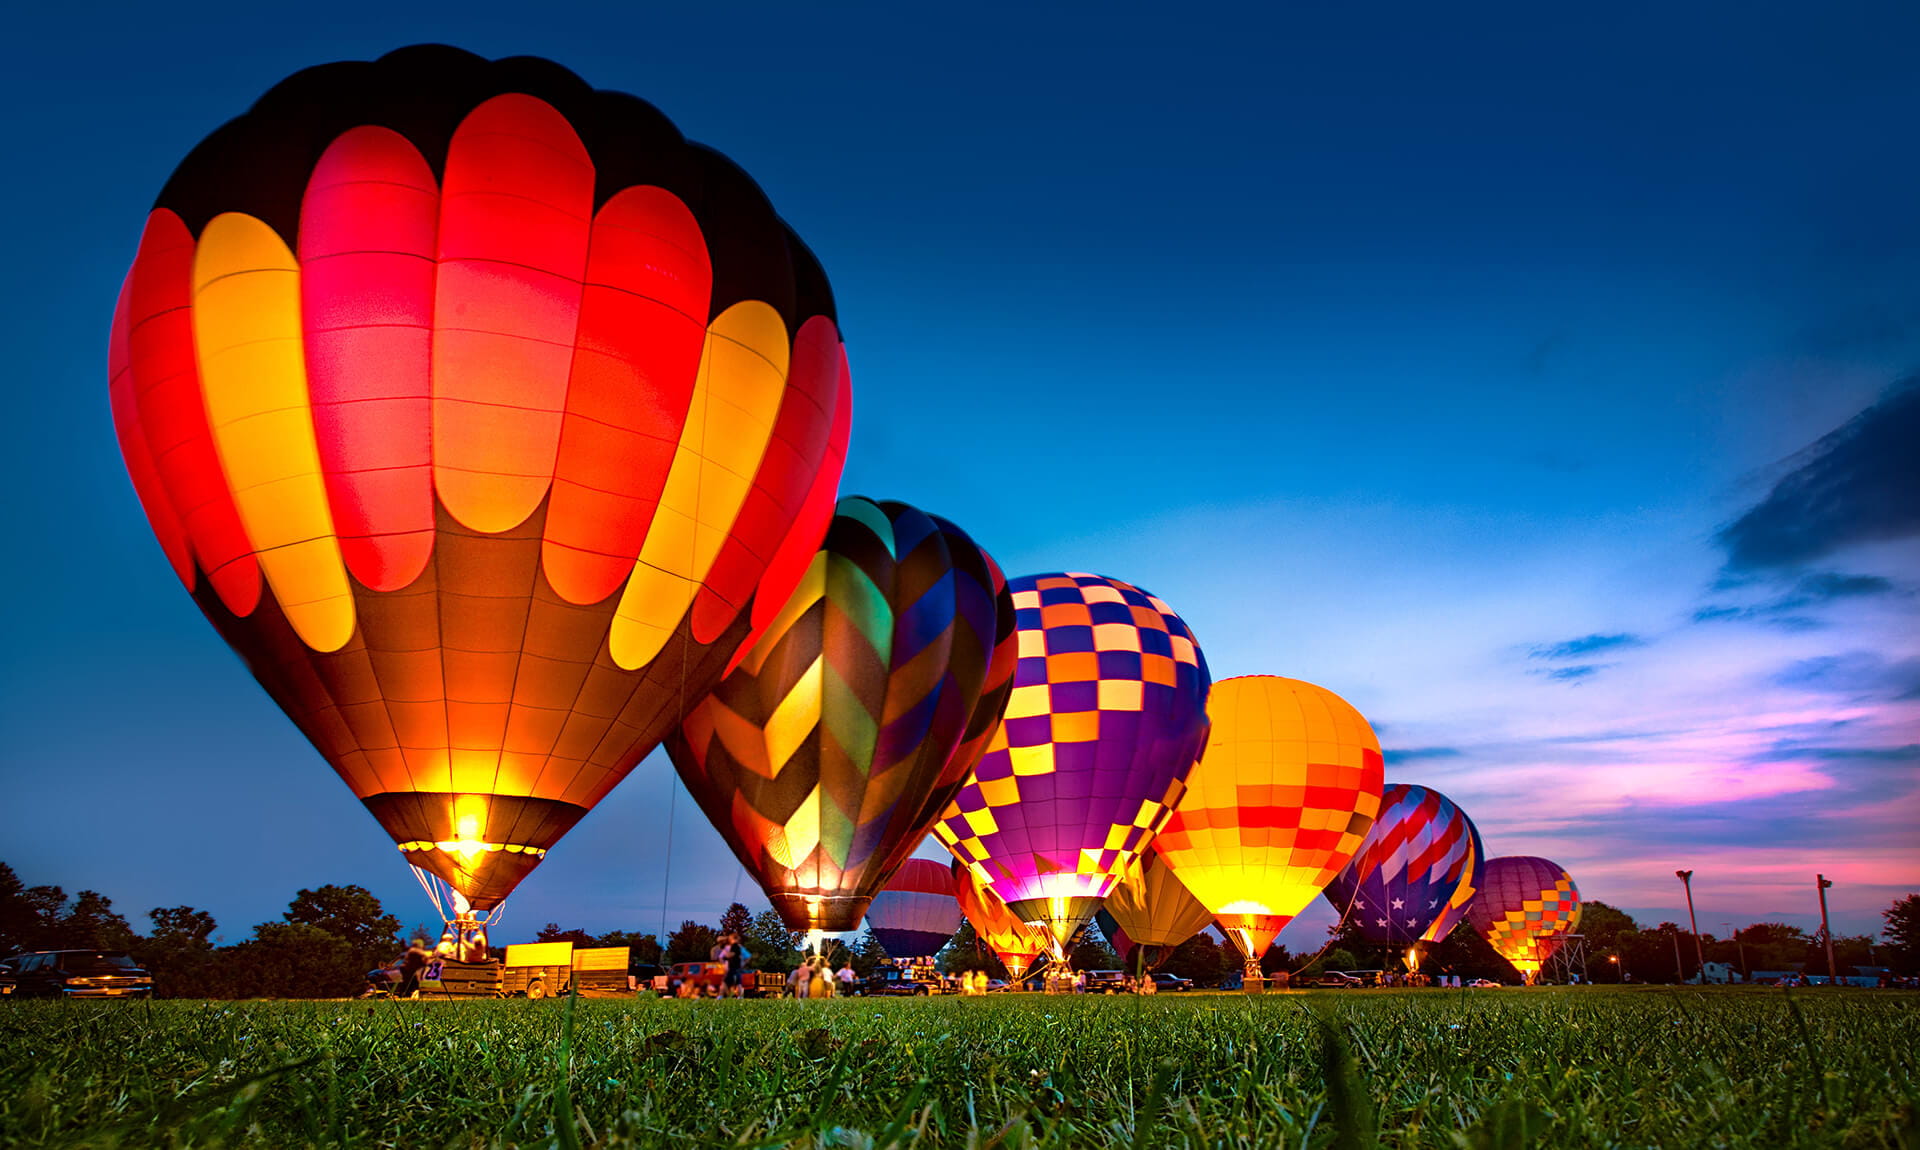 Multi-colored hot air balloons